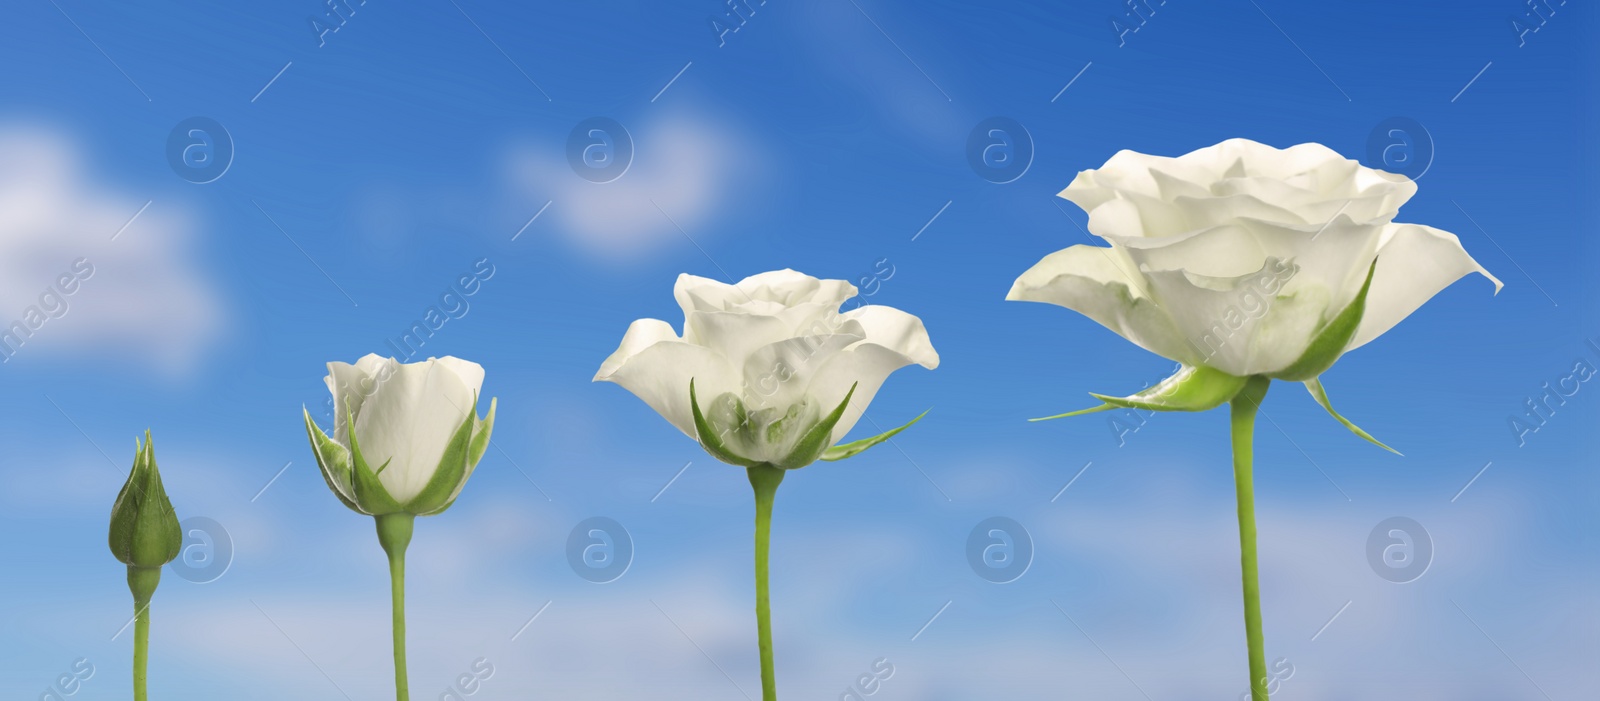 Image of Blooming stages of beautiful rose flower against sky